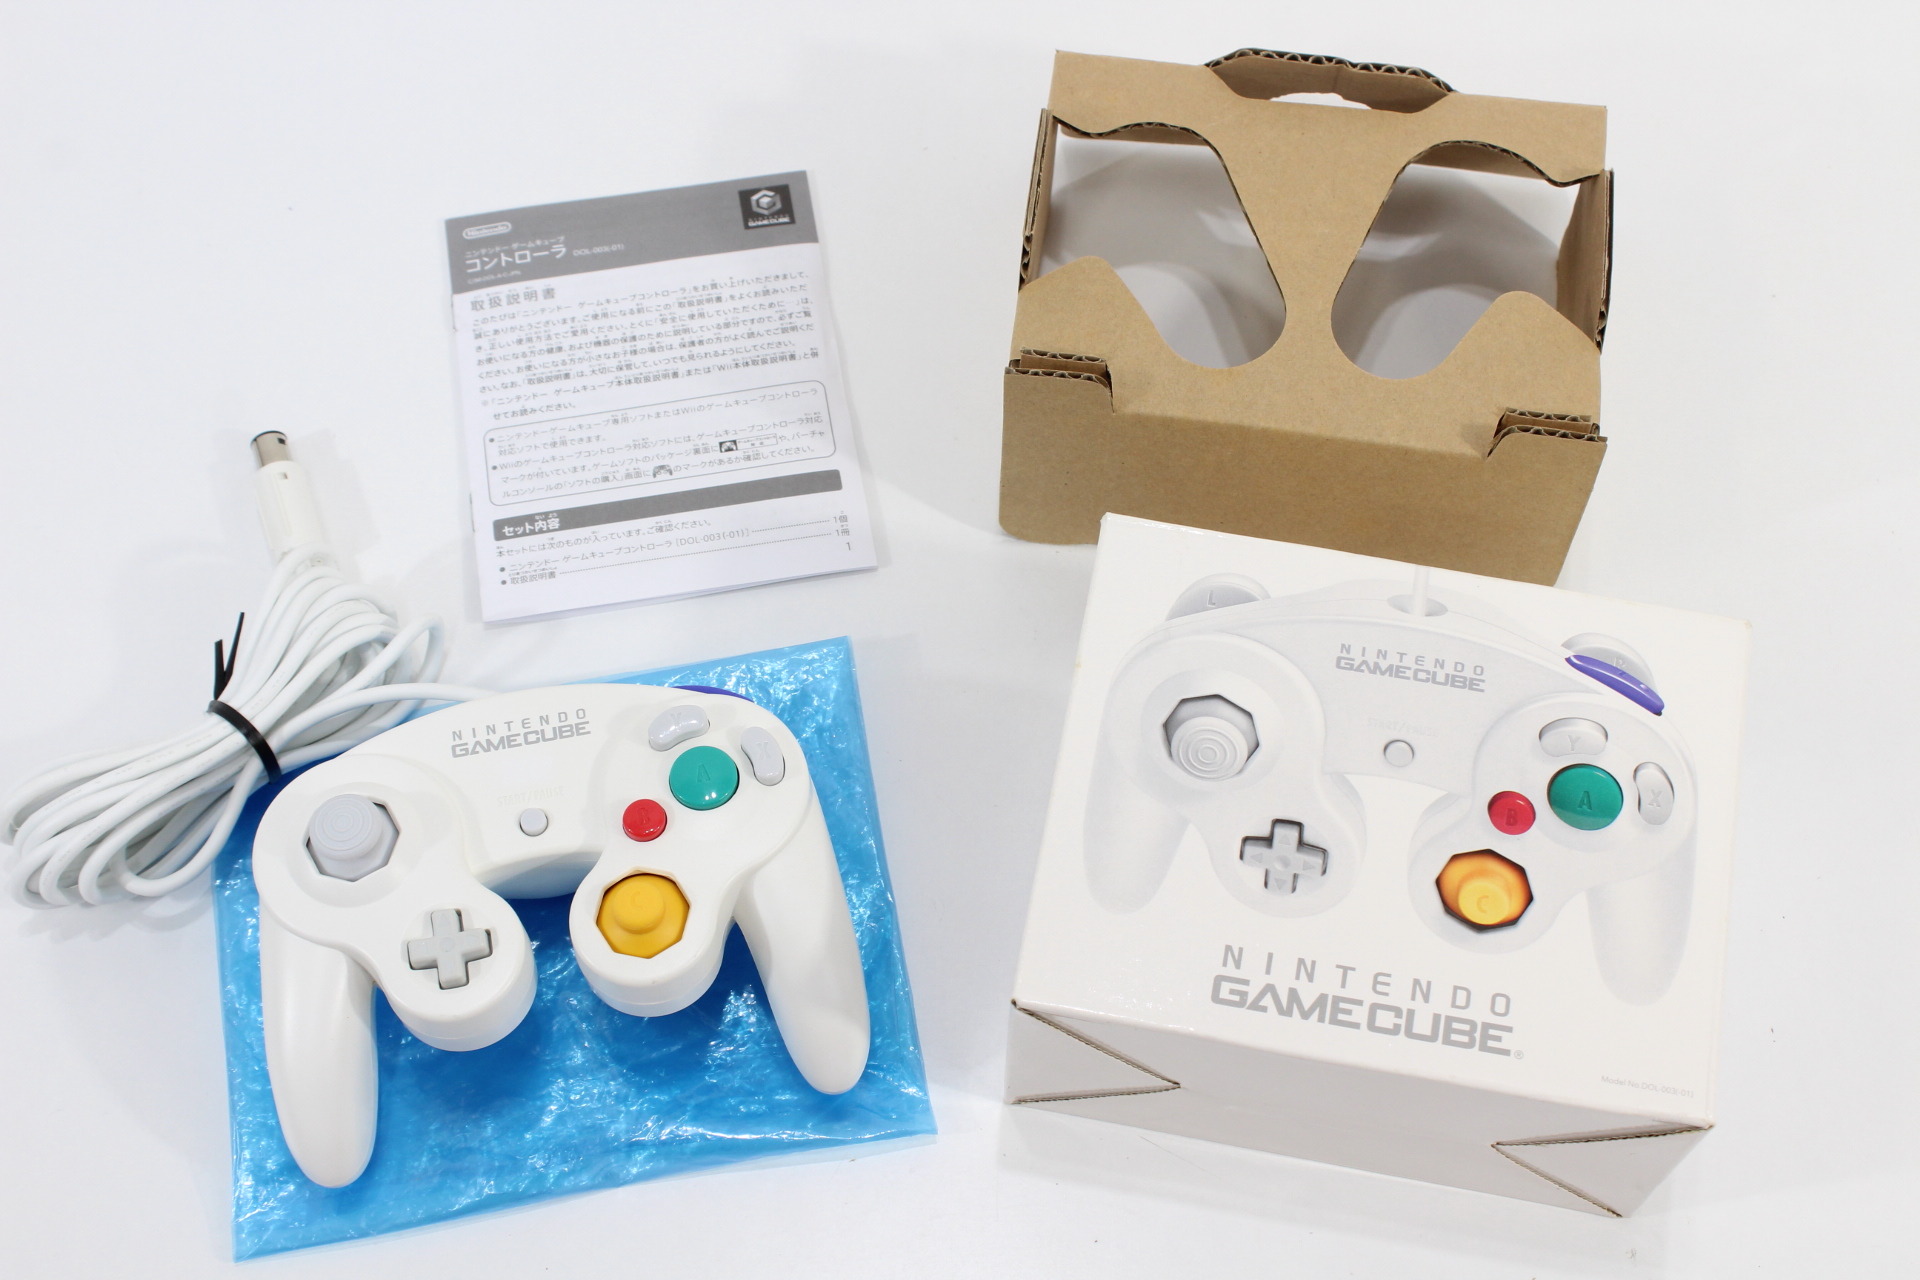 Official Nintendo Gamecube Controller Boxed White T3 OEM GC (B